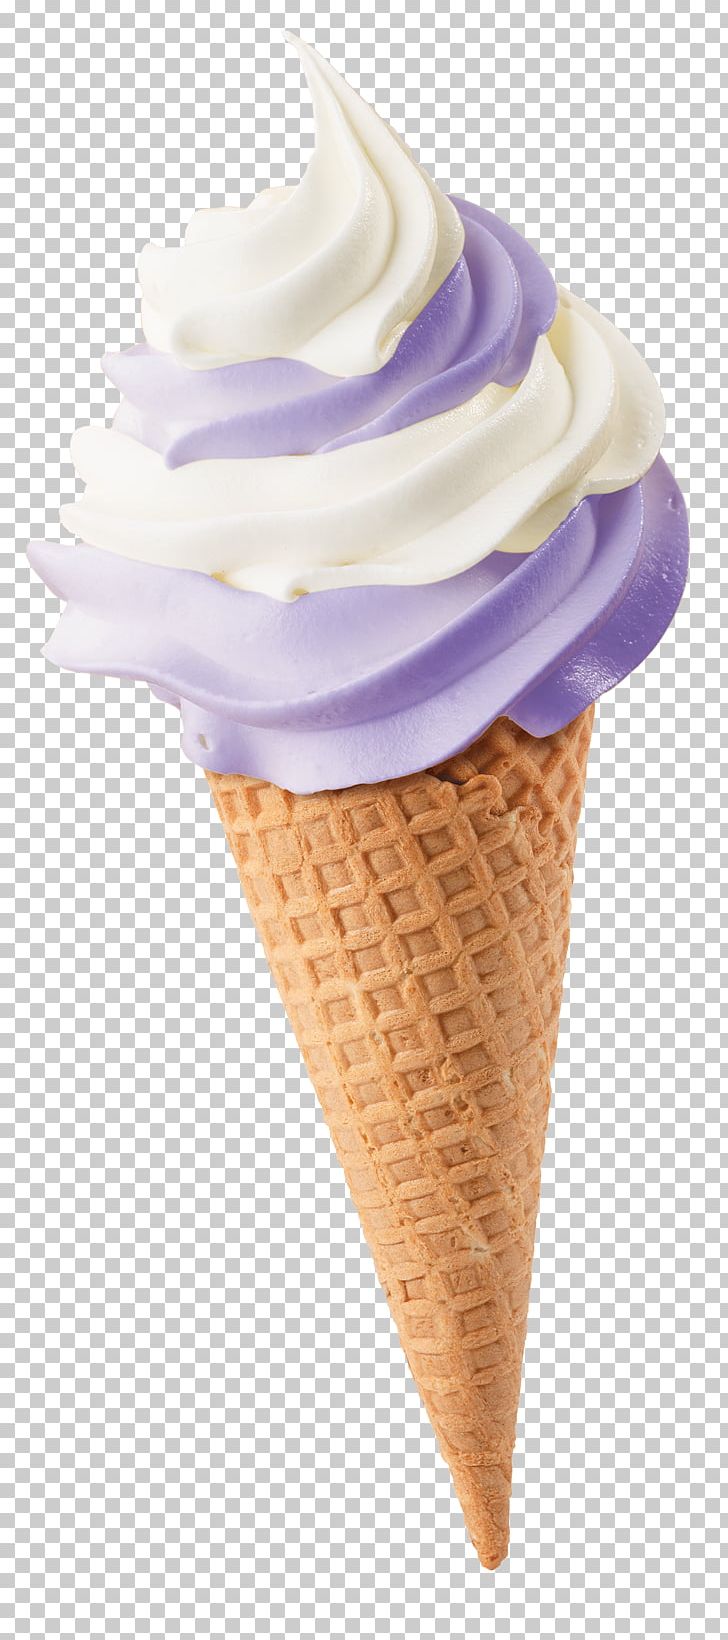 Ice Cream Cones Ube Halaya Northeast Regional Conference Love PNG, Clipart, Convenience, Convenience Shop, Cream, Dairy Product, Dessert Free PNG Download